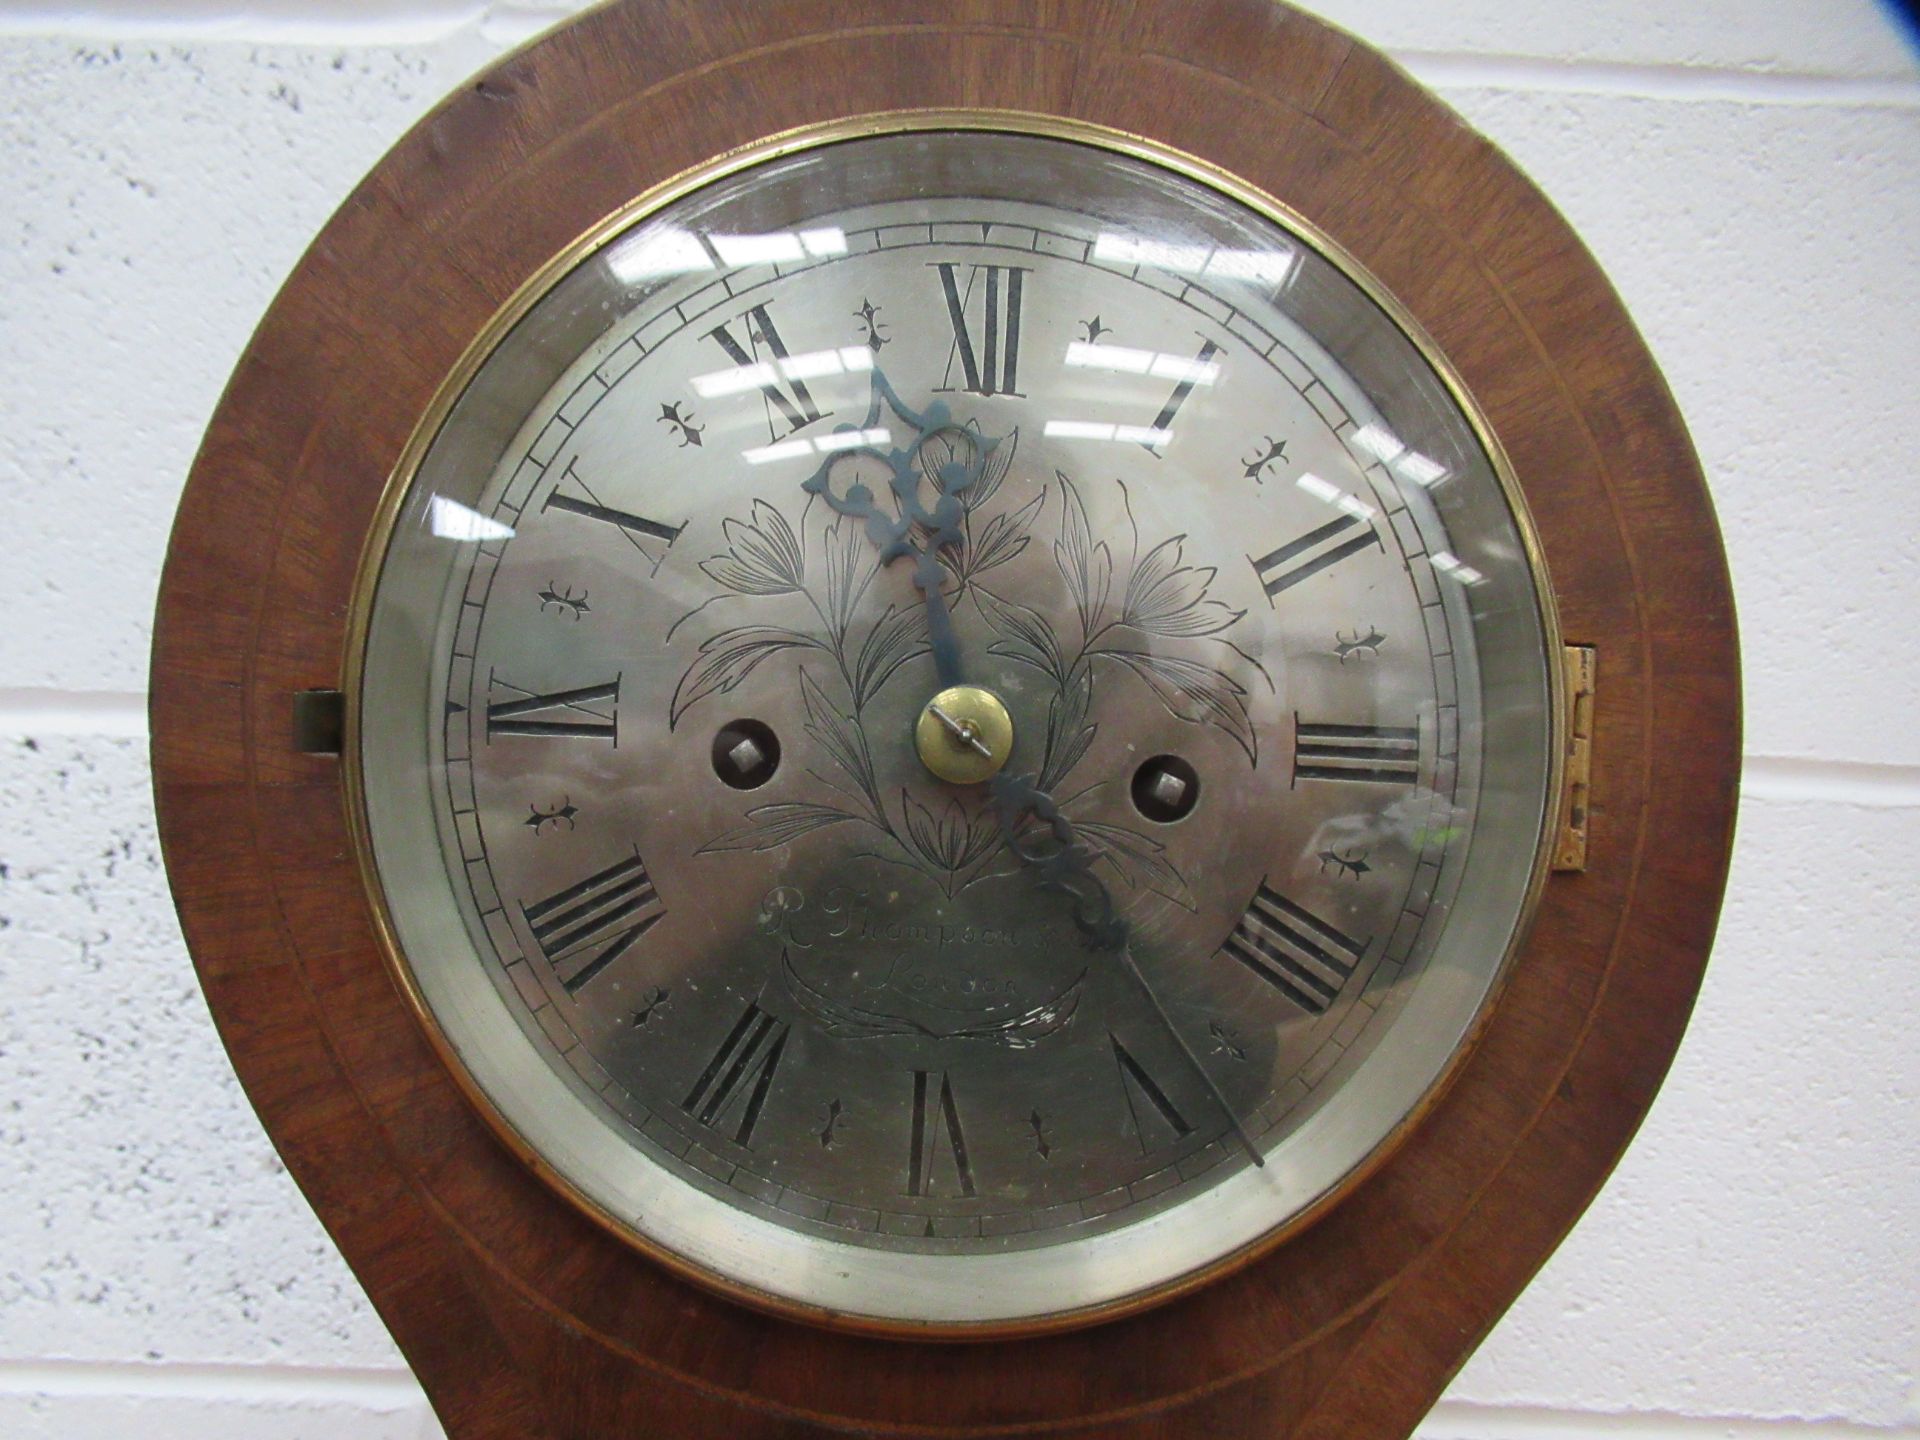 Wooden Balloon Clock with 'R Thompson & Son-London' Engraved to Clock Face - Image 3 of 6